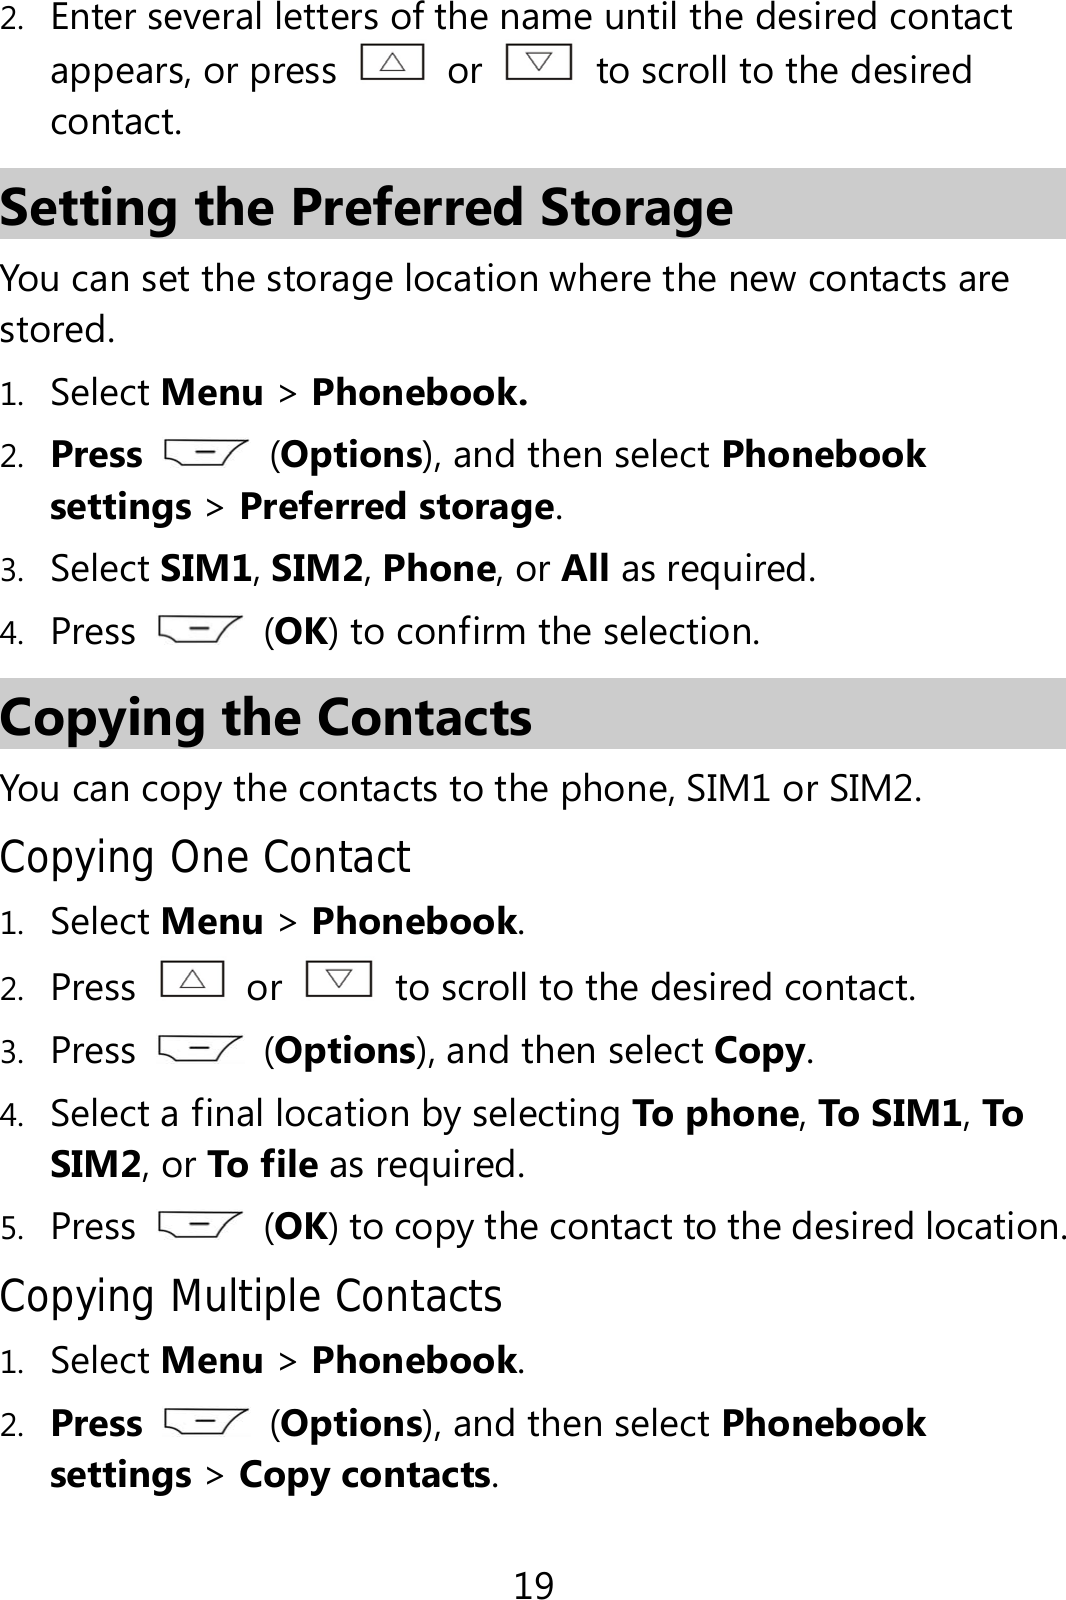 19 2. Enter several letters of the name until the desired contact appears, or press   or    to scroll to the desired contact. Setting the Preferred Storage You can set the storage location where the new contacts are stored. 1. Select Menu &gt; Phonebook. 2. Press   (Options), and then select Phonebook settings &gt; Preferred storage. 3. Select SIM1, SIM2, Phone, or All as required. 4. Press   (OK) to confirm the selection. Copying the Contacts You can copy the contacts to the phone, SIM1 or SIM2. Copying One Contact 1. Select Menu &gt; Phonebook. 2. Press  or    to scroll to the desired contact. 3. Press   (Options), and then select Copy. 4. Select a final location by selecting To phone, To SIM1, To SIM2, or To f ile as required. 5. Press   (OK) to copy the contact to the desired location. Copying Multiple Contacts 1. Select Menu &gt; Phonebook.   2. Press   (Options), and then select Phonebook settings &gt; Copy contacts. 